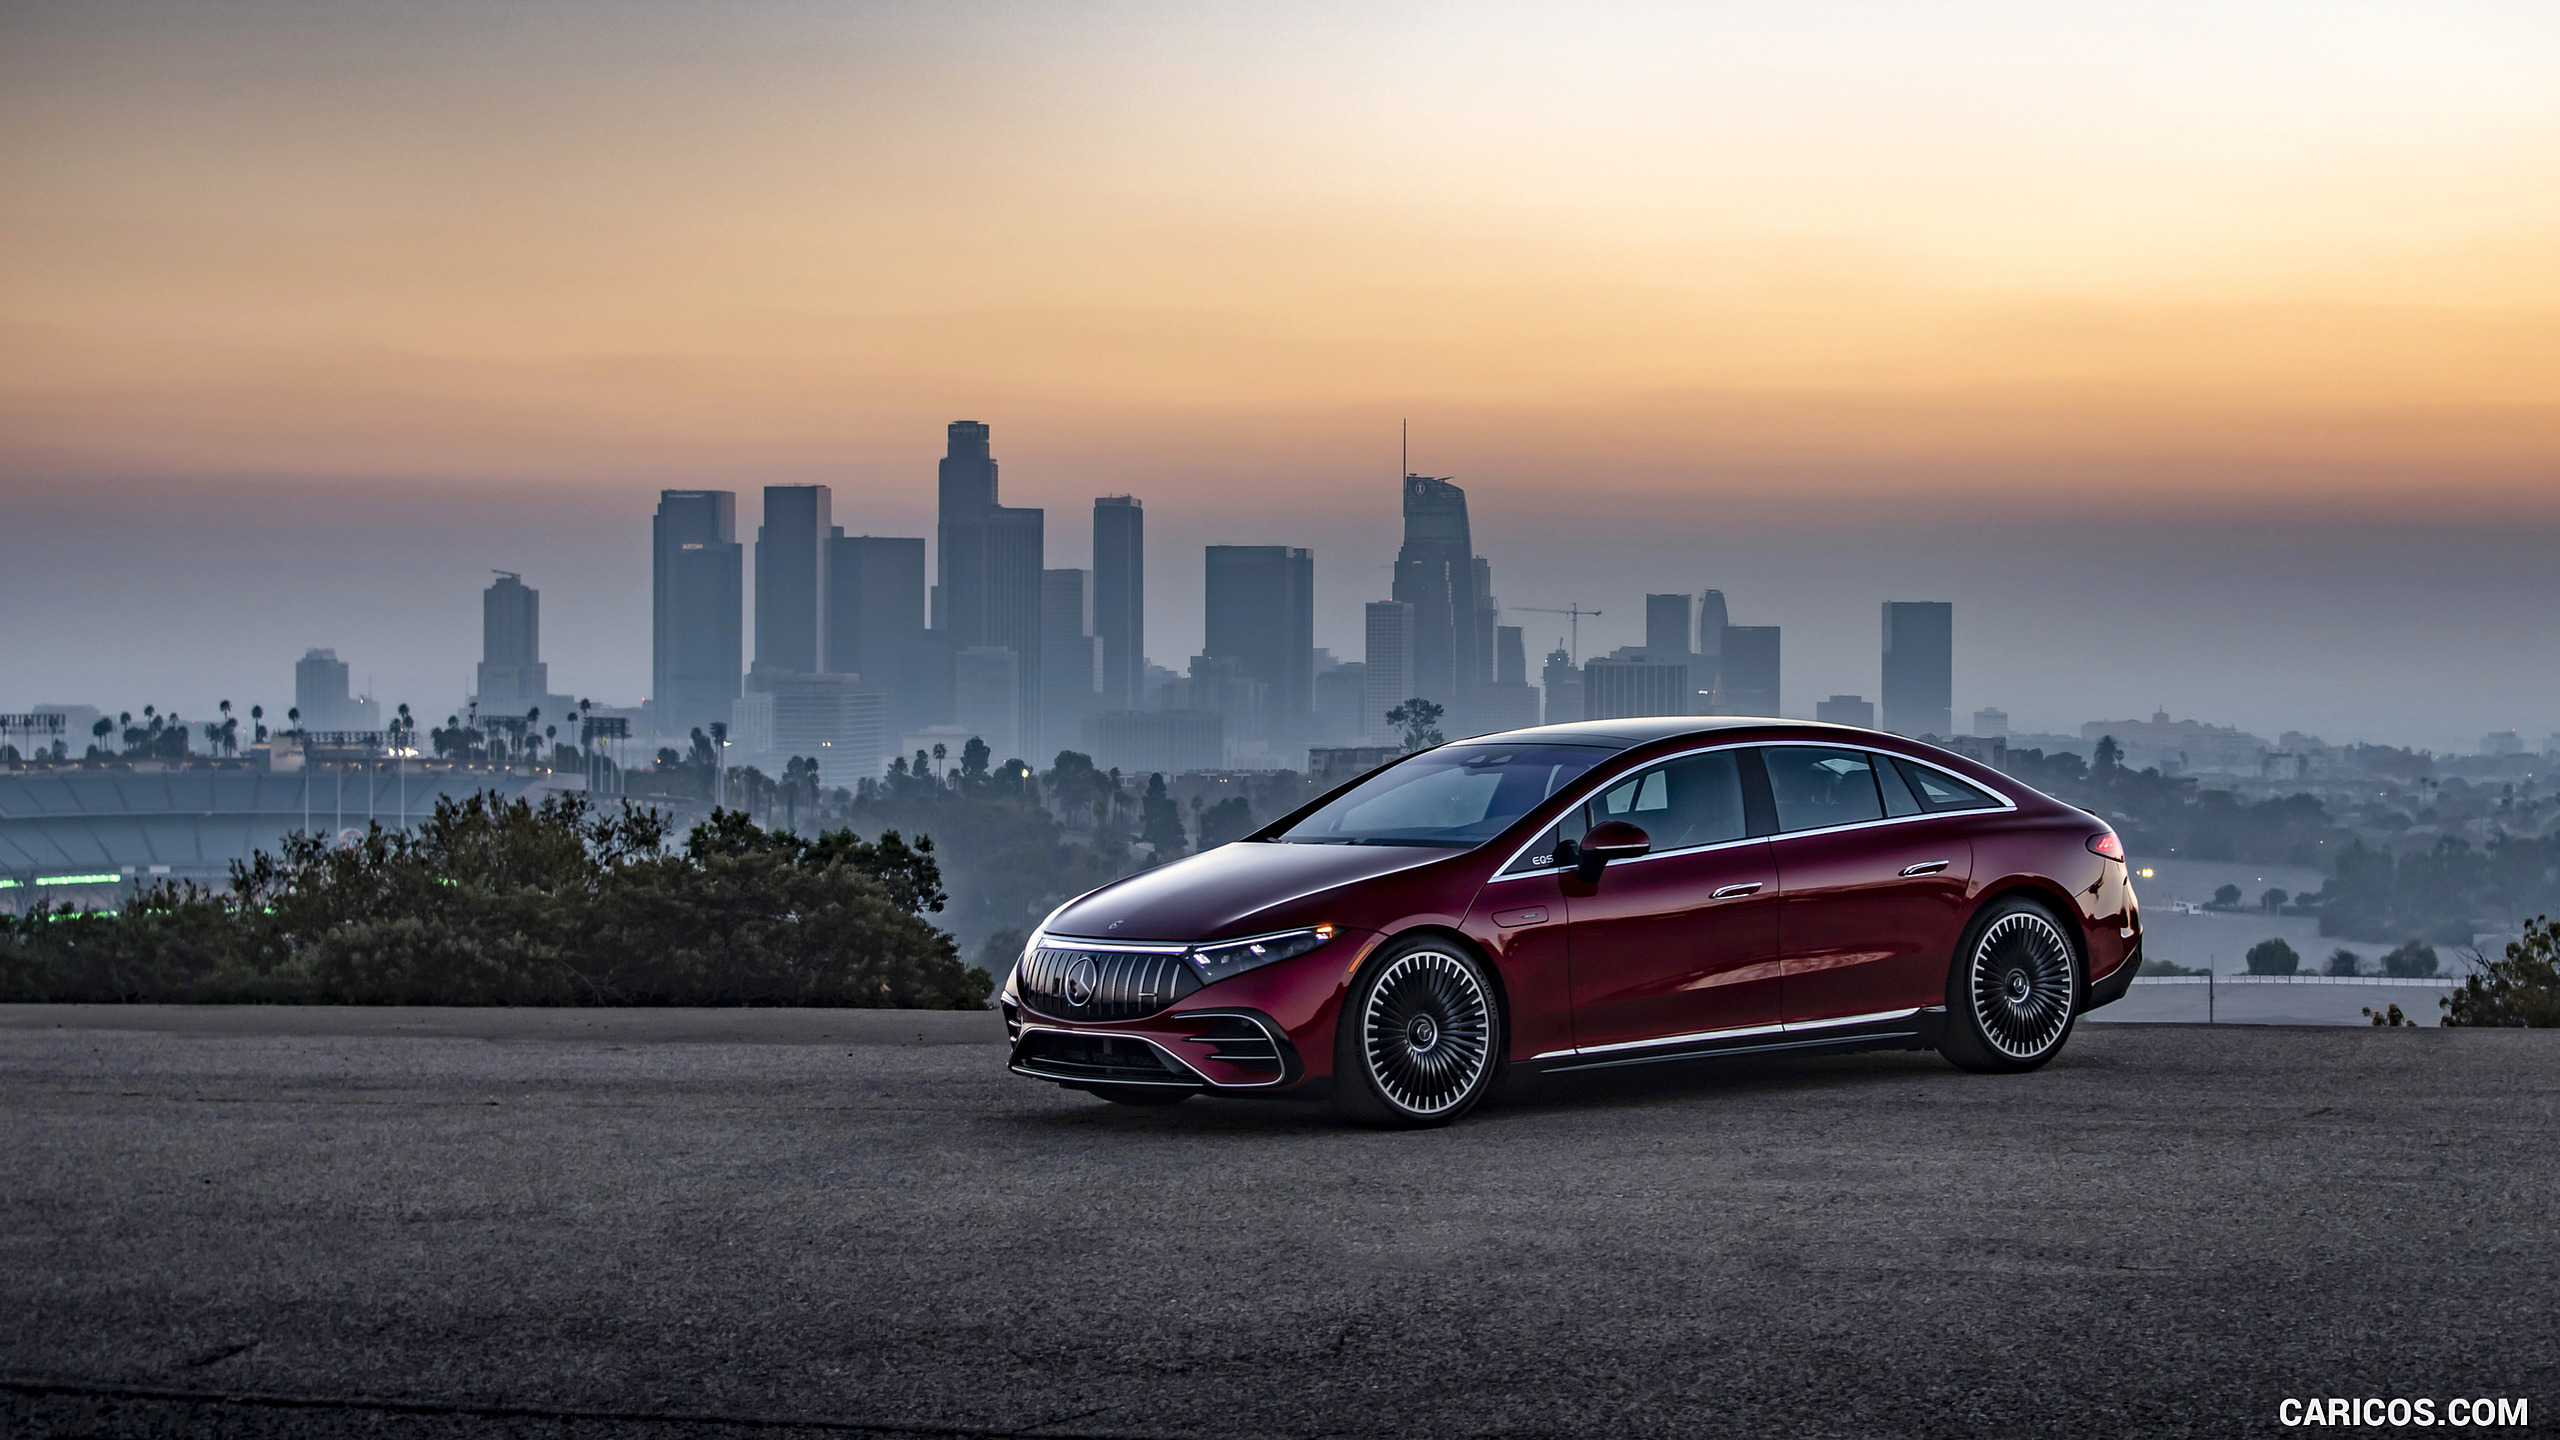 2022 Mercedes-AMG EQS 53 4MATIC+ (Color: Hyazinth Red Metallic) - Front Three-Quarter, #61 of 76